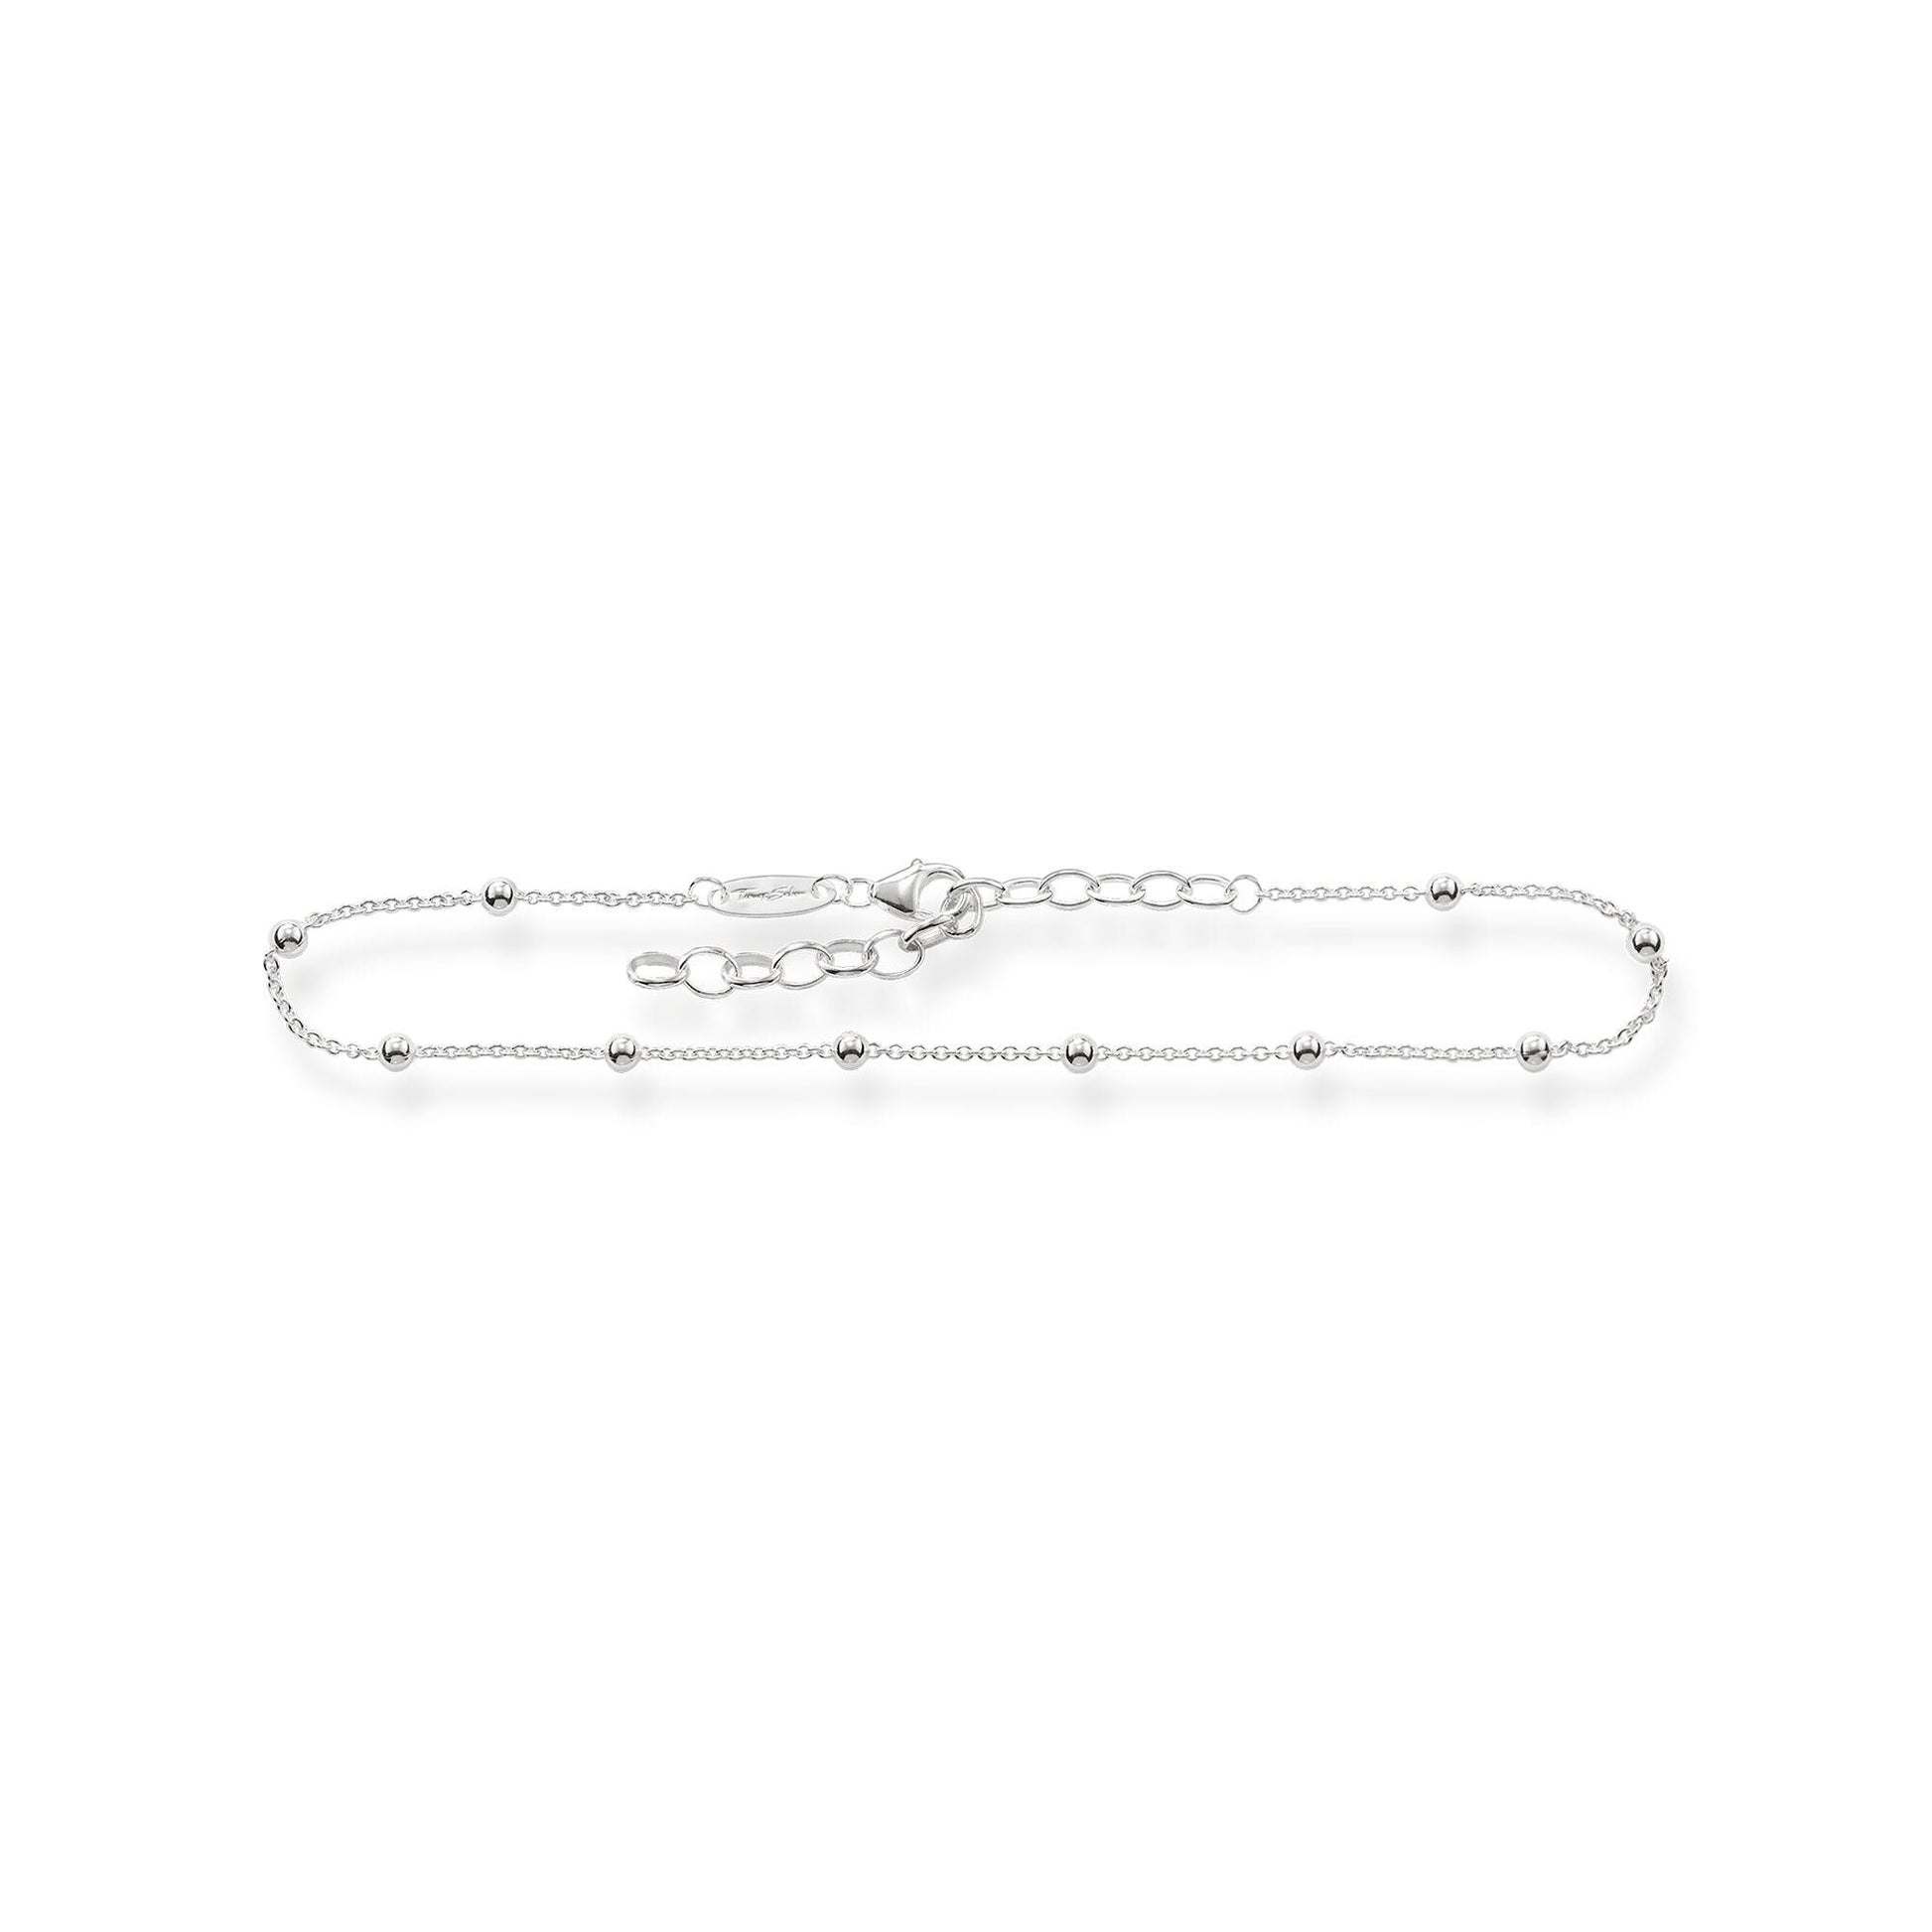 Thomas Sabo Sterling Silver Beaded Anklet AK0002 - Judith Hart Jewellers